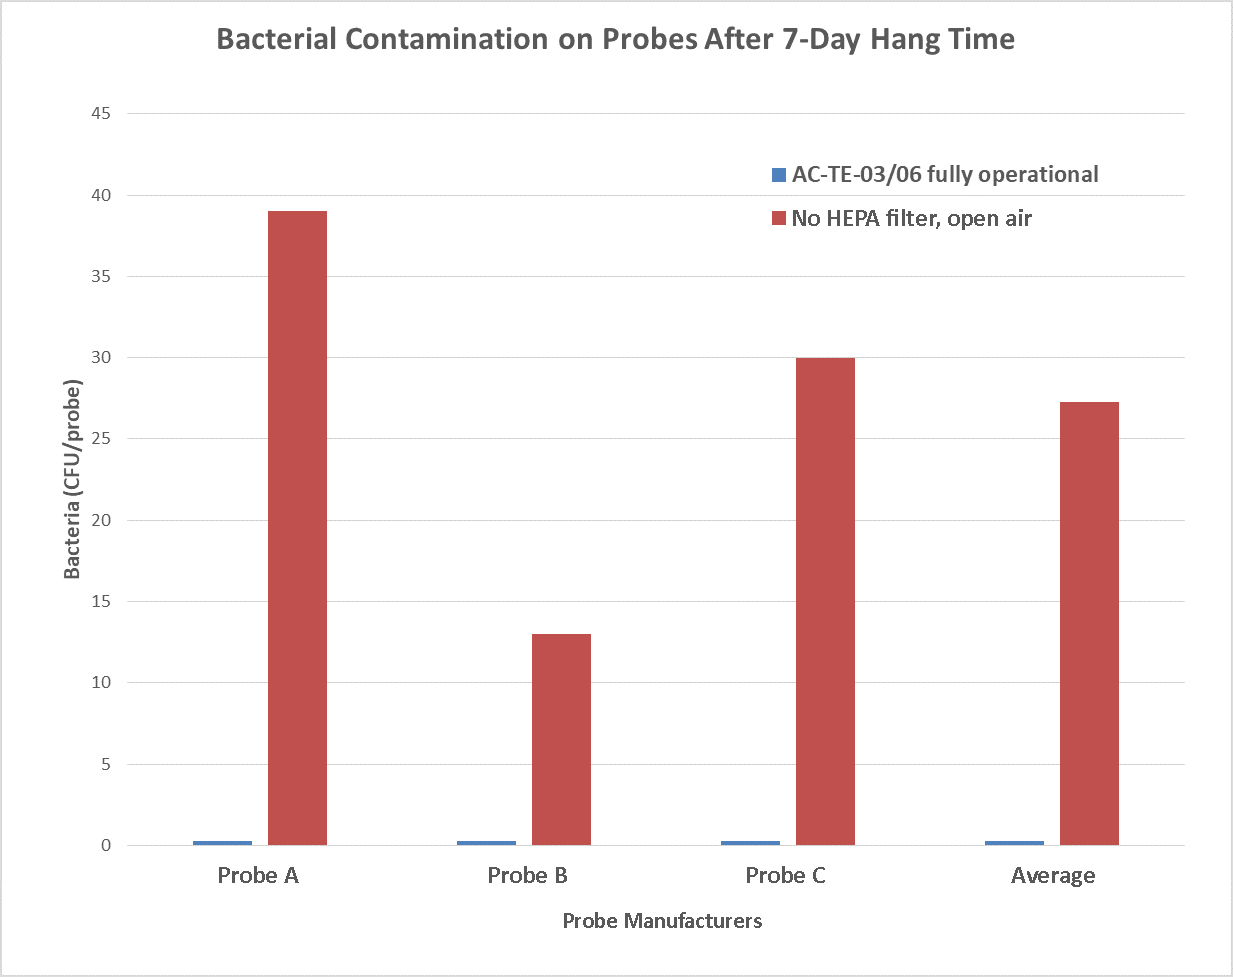 Bacterial Contamination Of Probes After 7-Day Hang Time